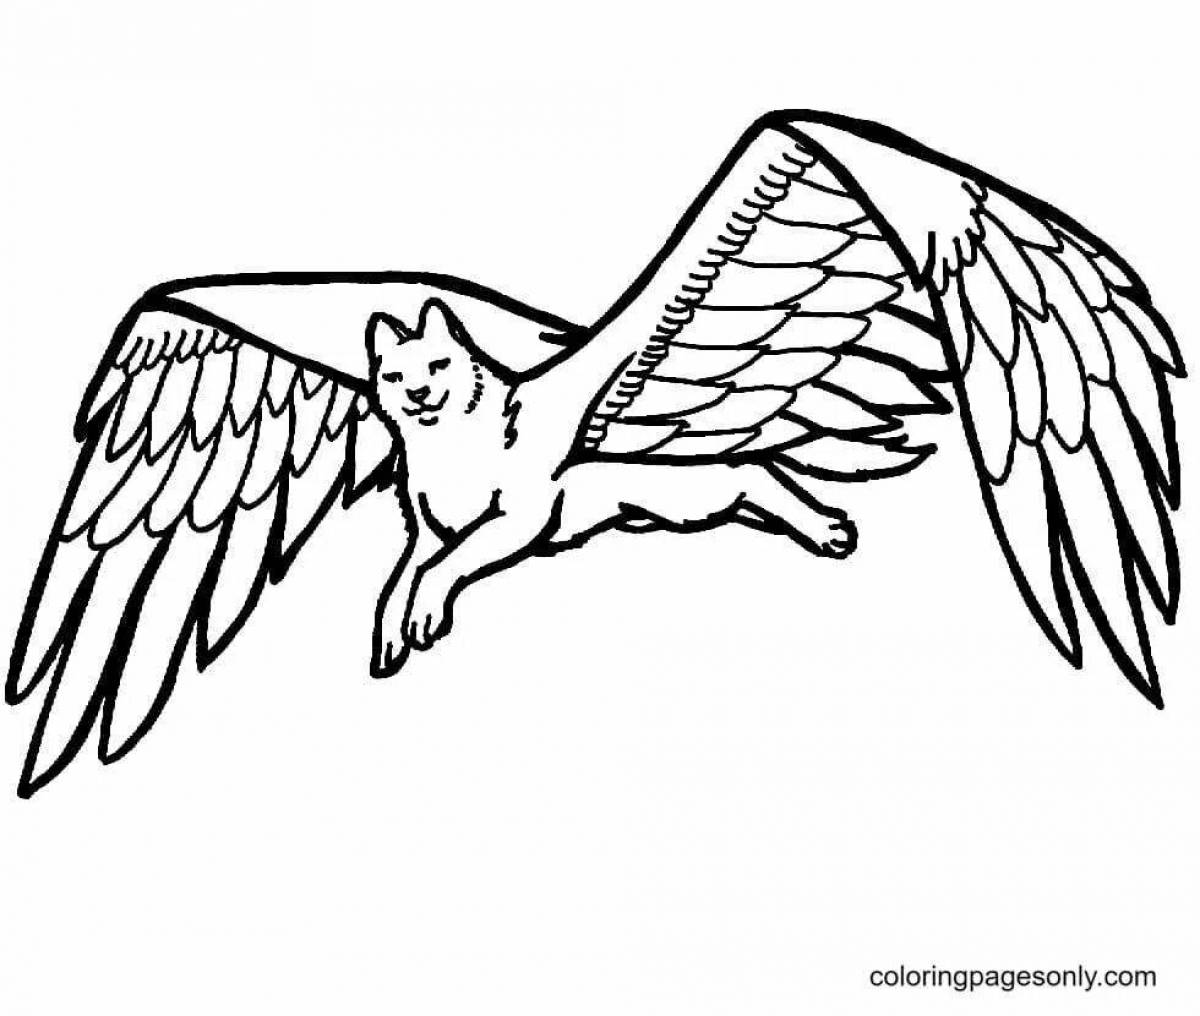 Deluxe coloring wolf with wings